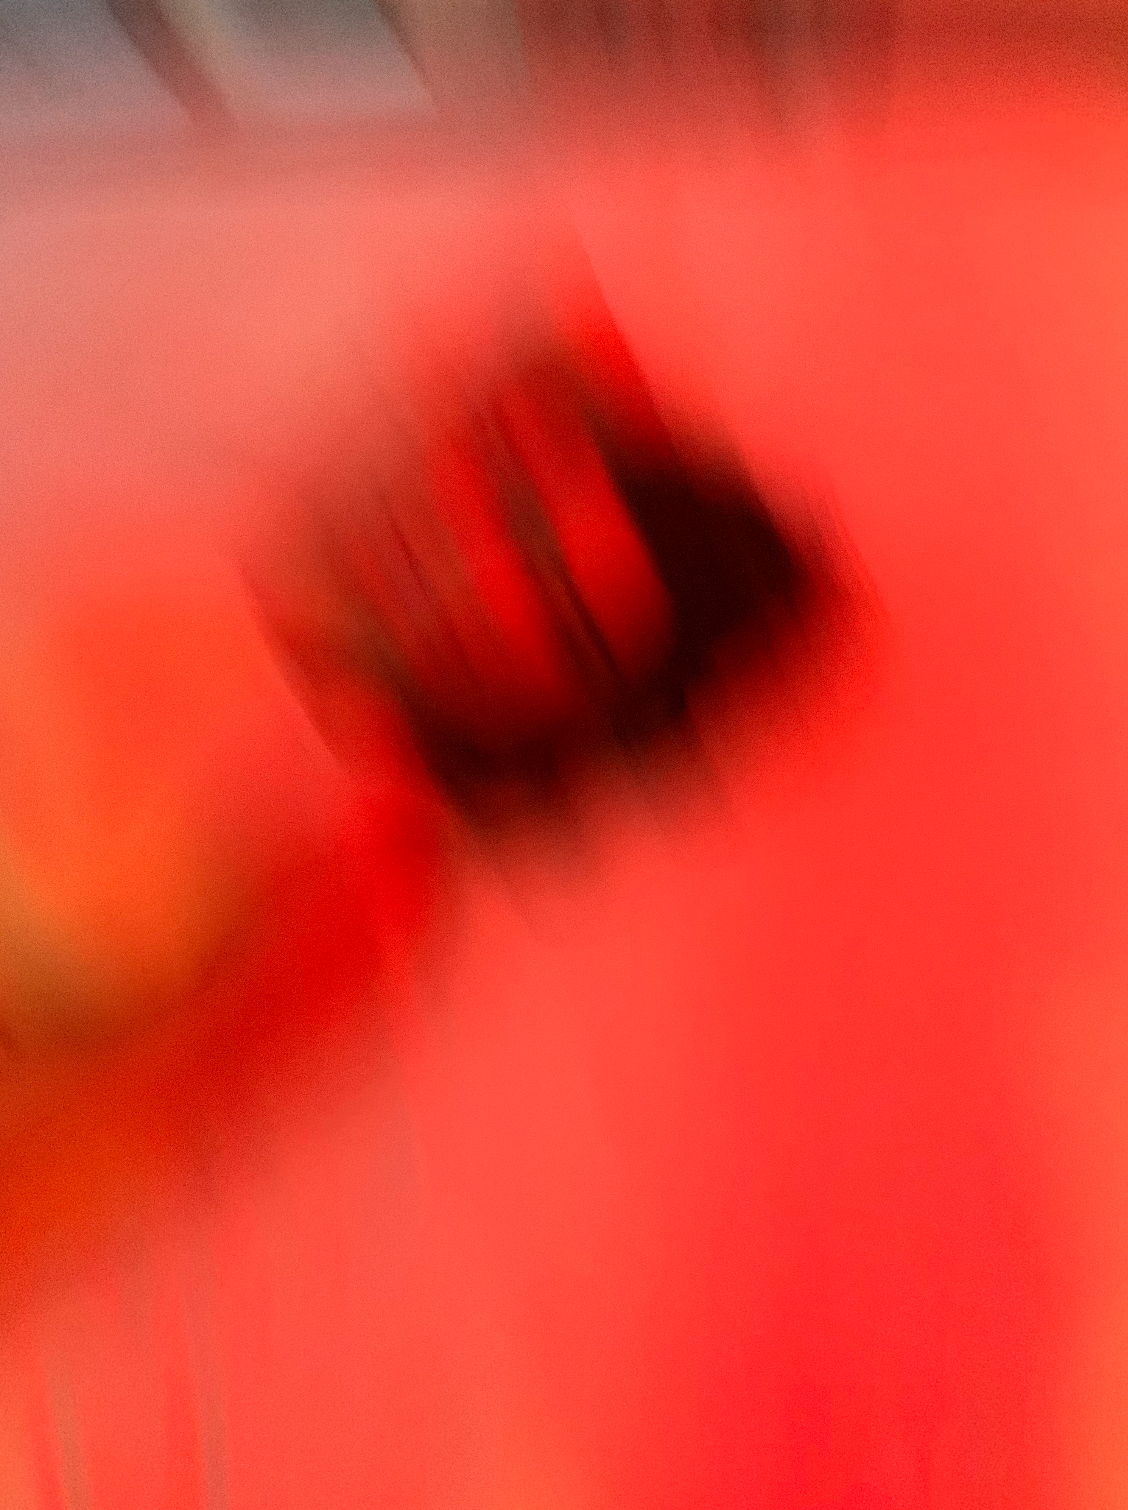 A red-toned blurry figure laying on a bed